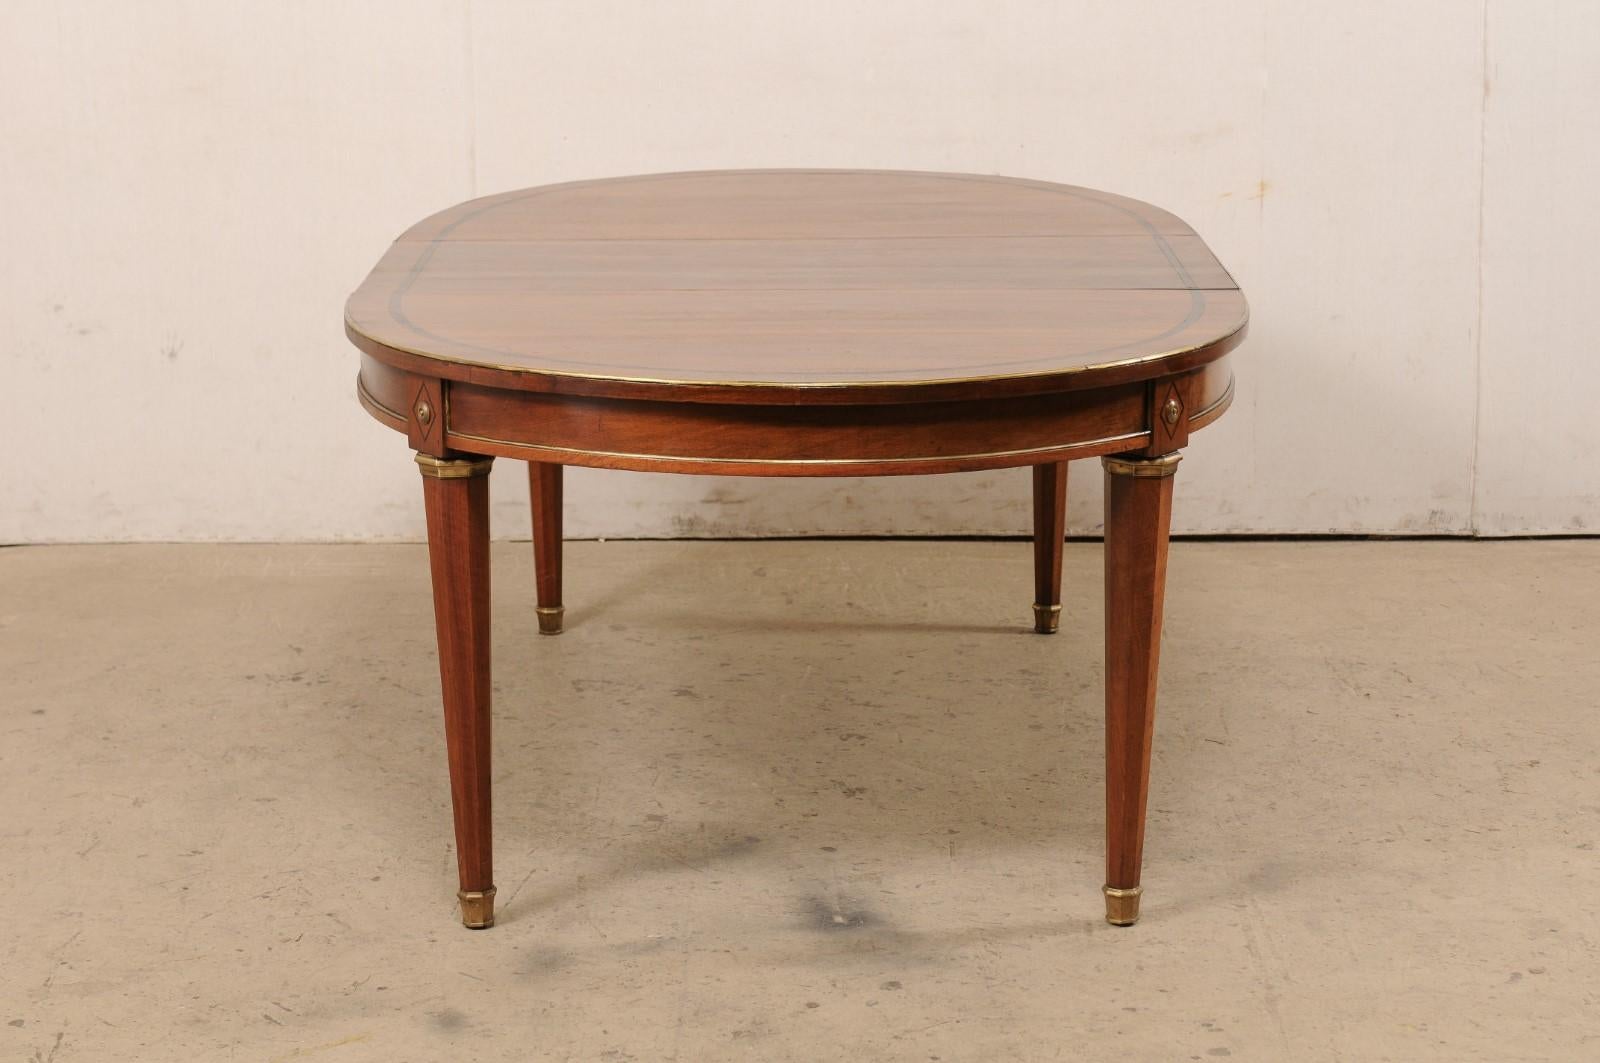 French Neoclassic Style Oval Table with Brass Trim & Accents '1 Leaf Extension' In Good Condition For Sale In Atlanta, GA